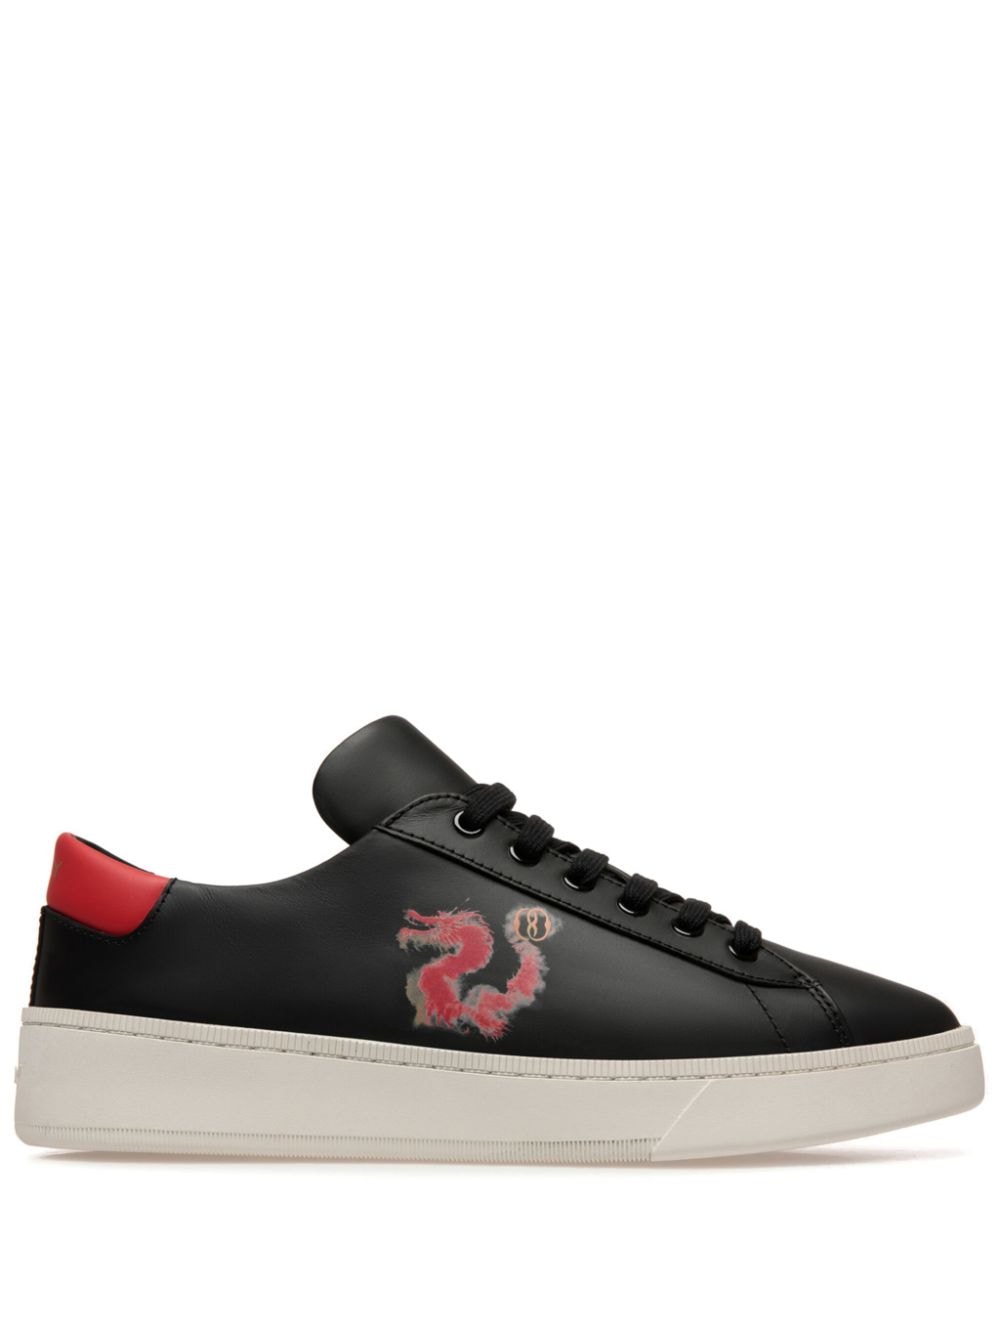 Bally lace-up leather sneakers - Black von Bally